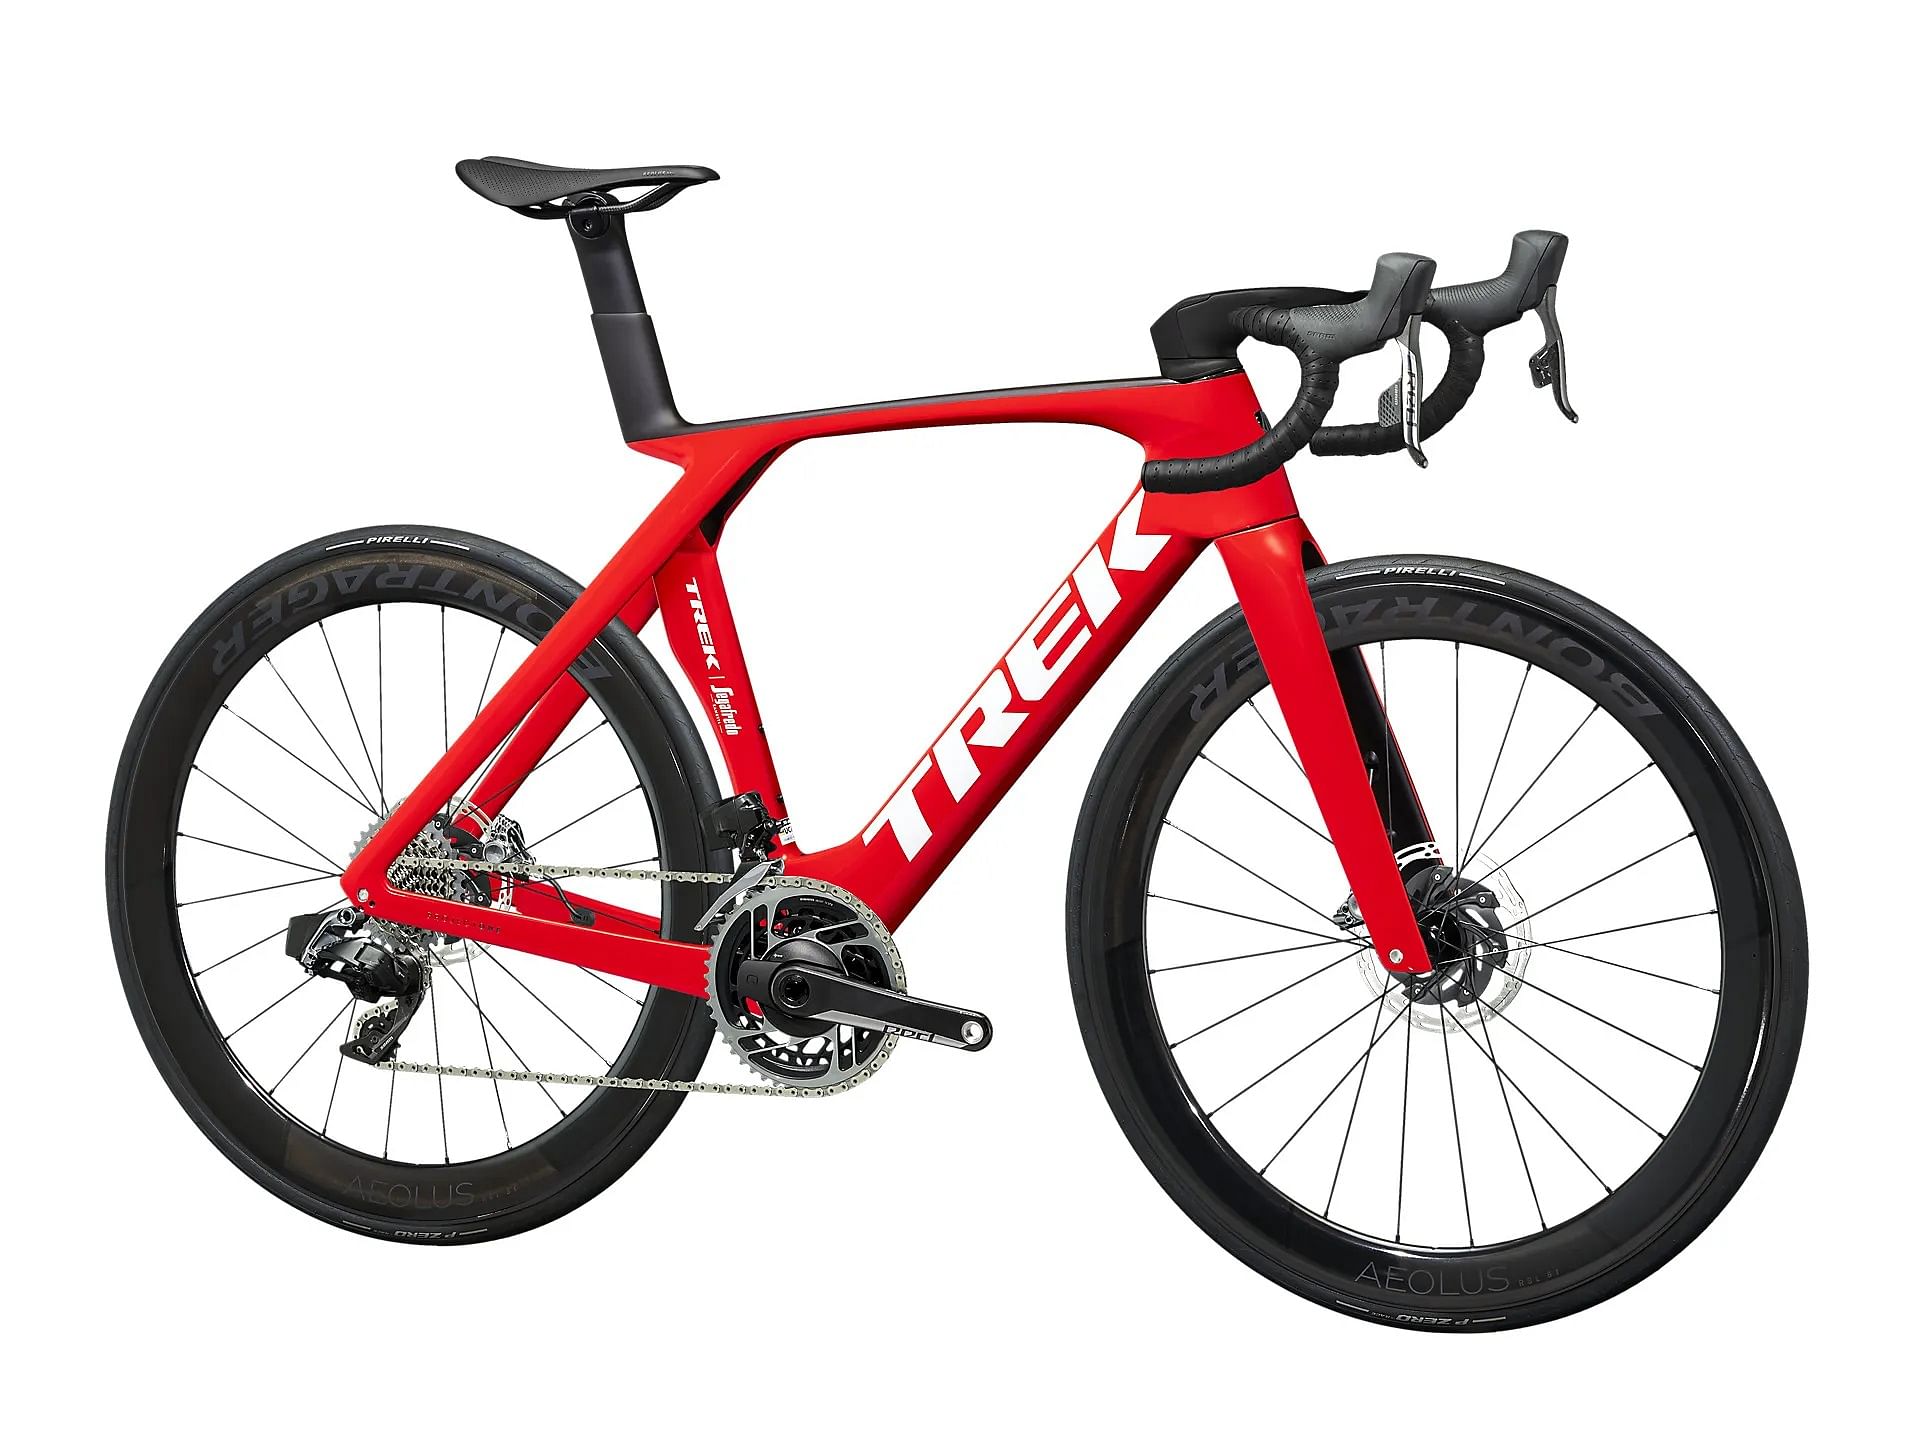 ride-and-race-with-the-new-trek-madone-slr-9-road-bike